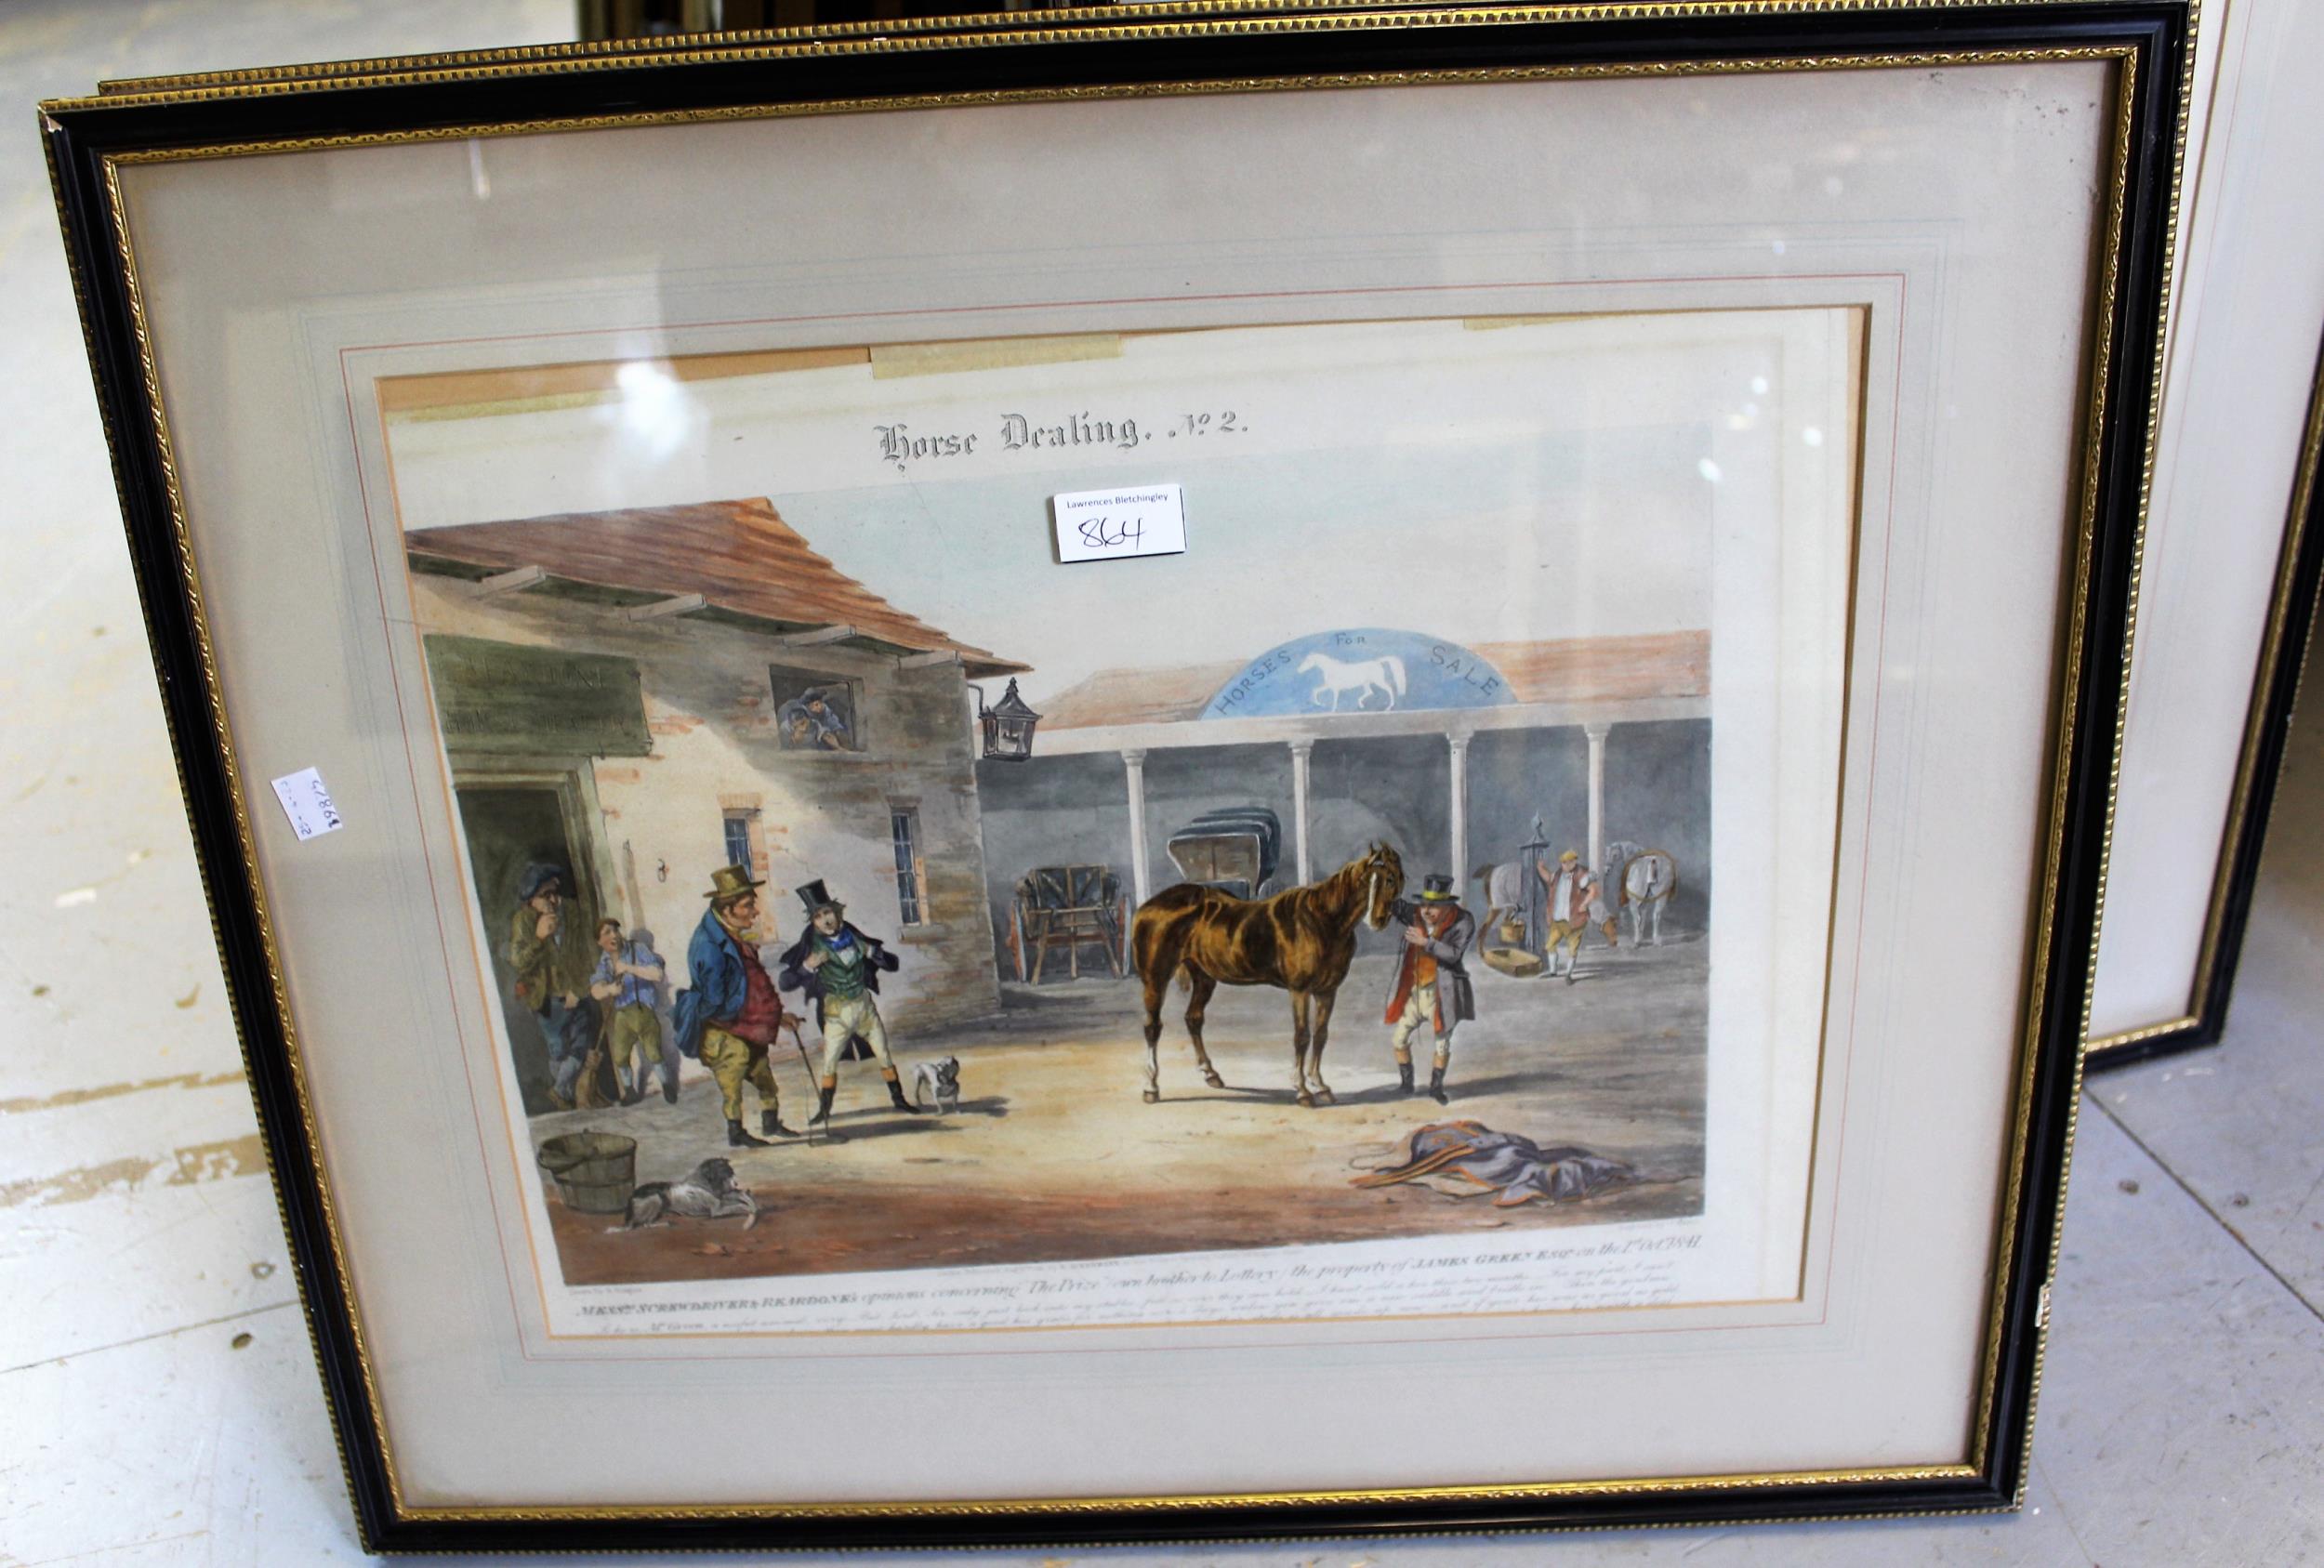 Pair of framed coloured engravings, titled ' Horse Dealing No. 1 and No. 2 ', engraved J. Harris, - Image 2 of 3